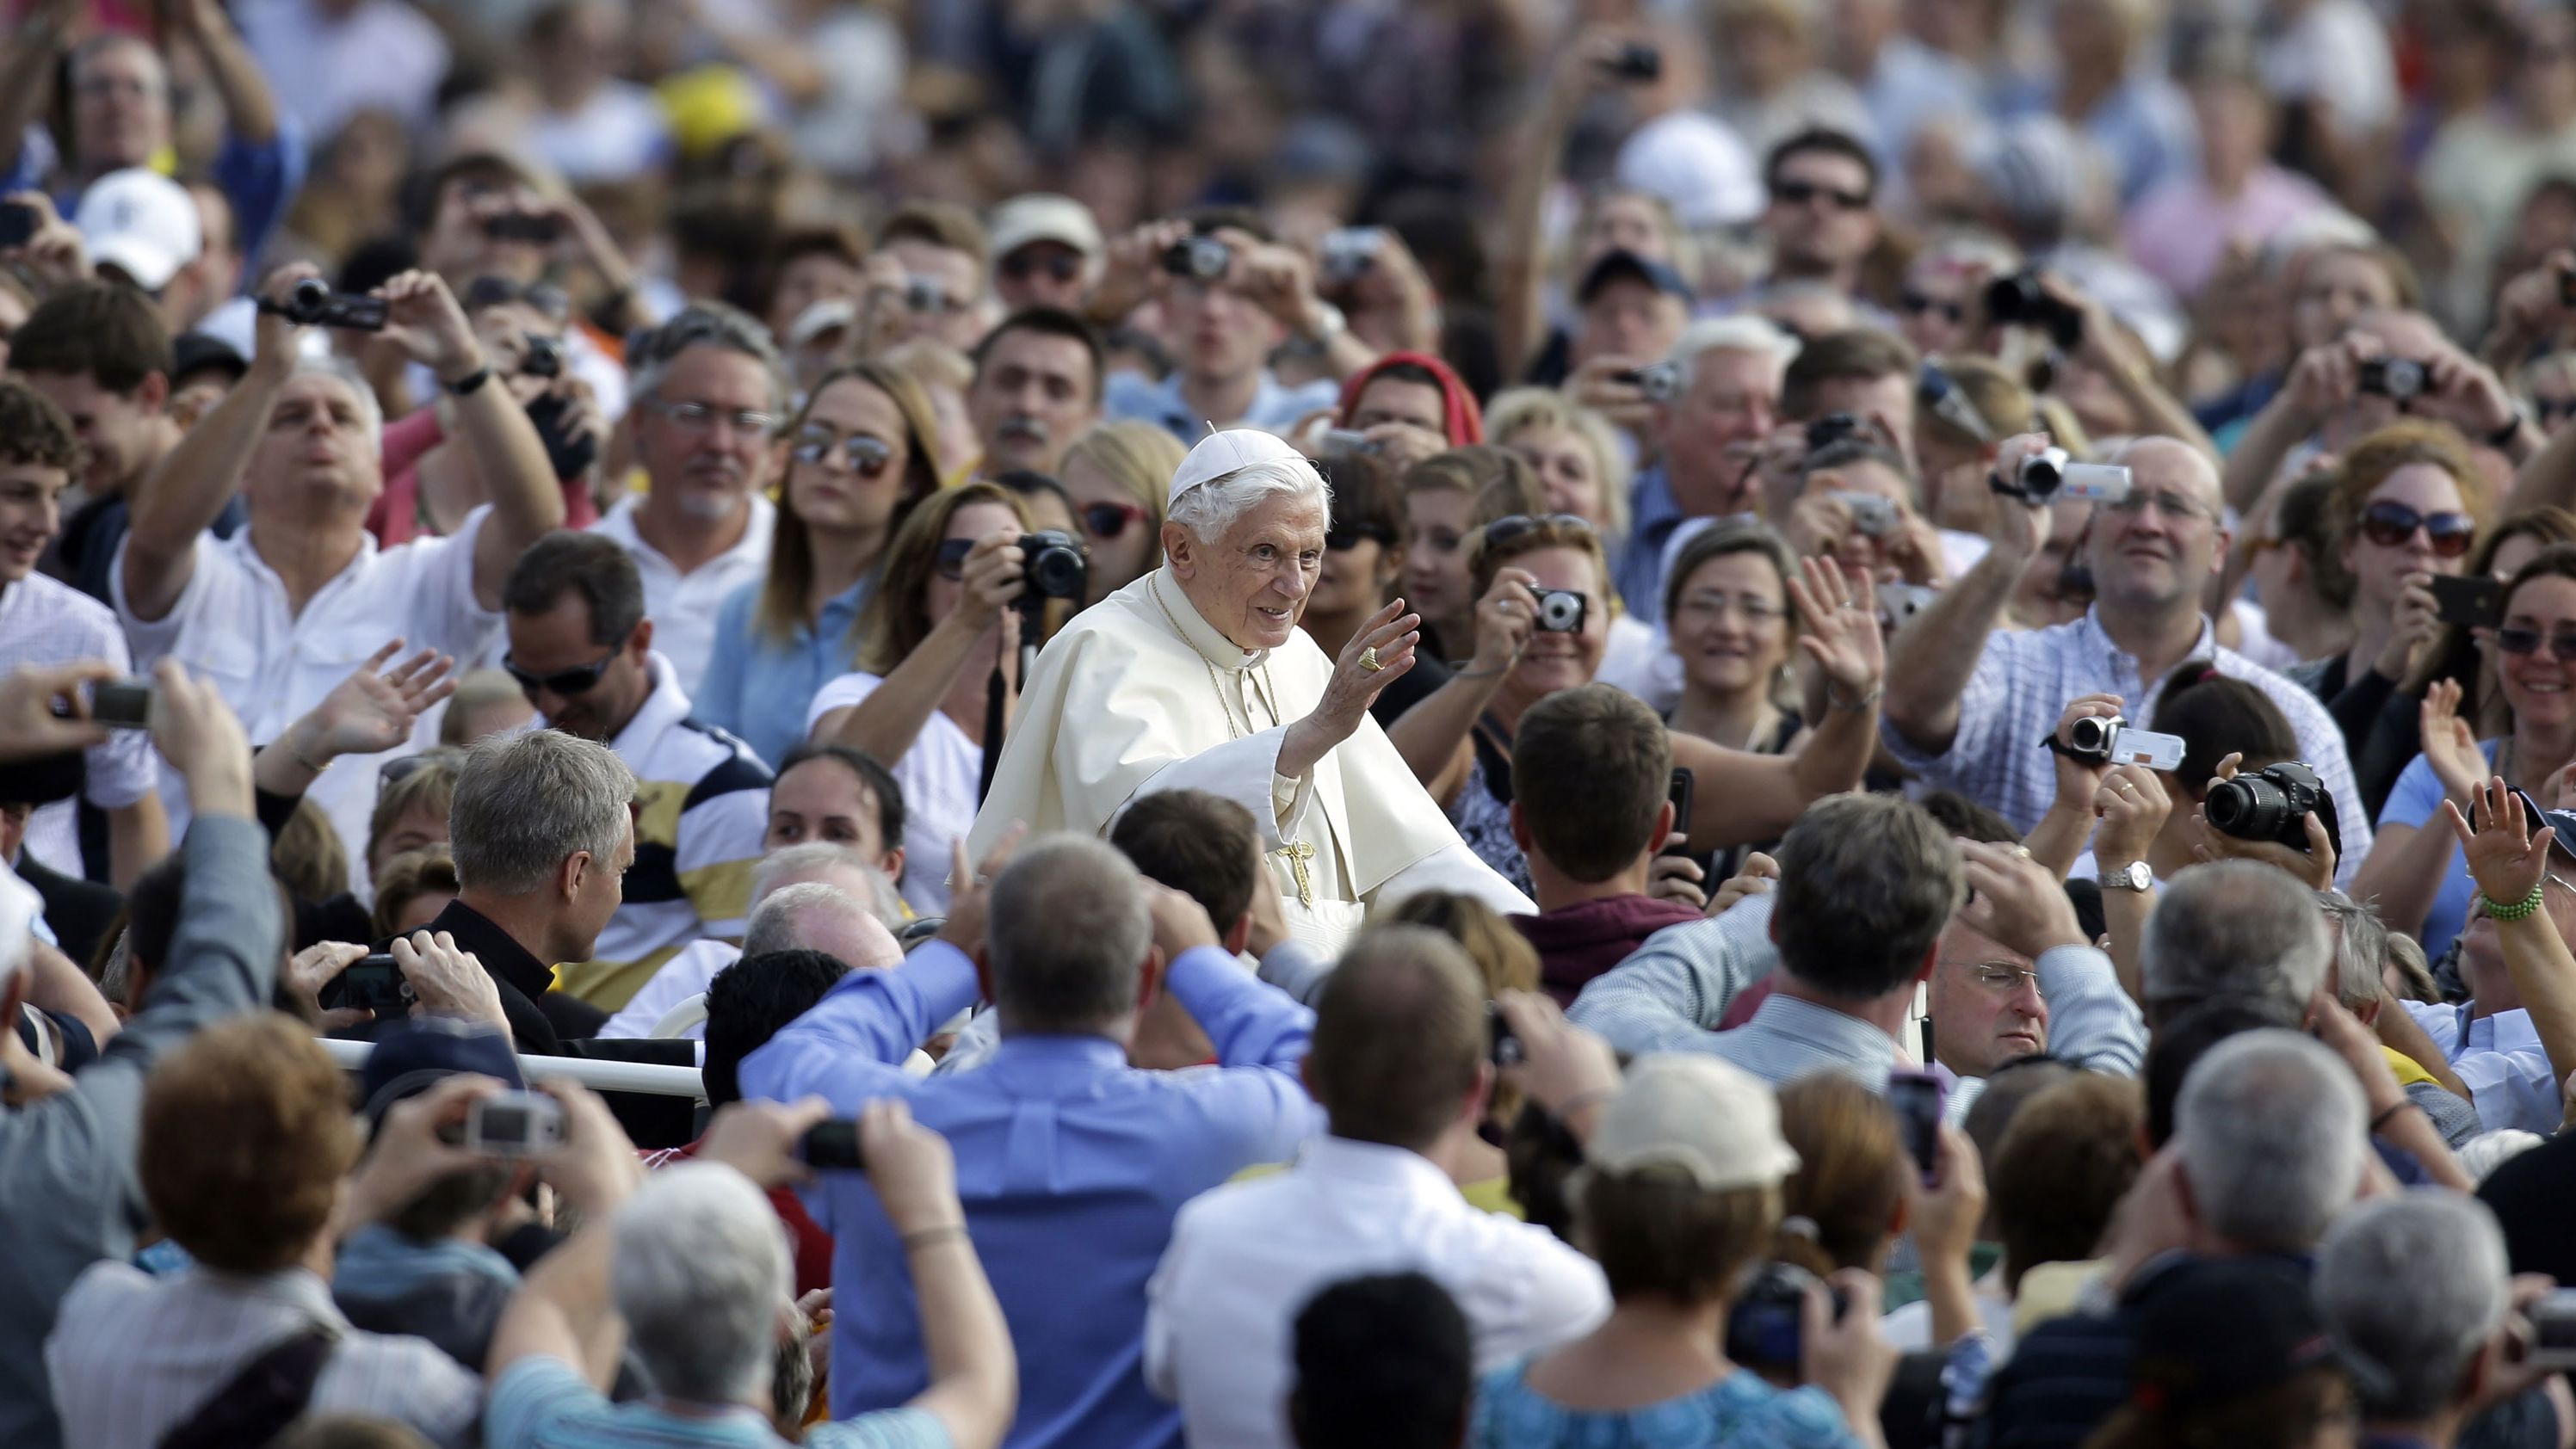 Benedict delivers his blessing as he is driven through the crowd in St. Peter's Square in October 2012.